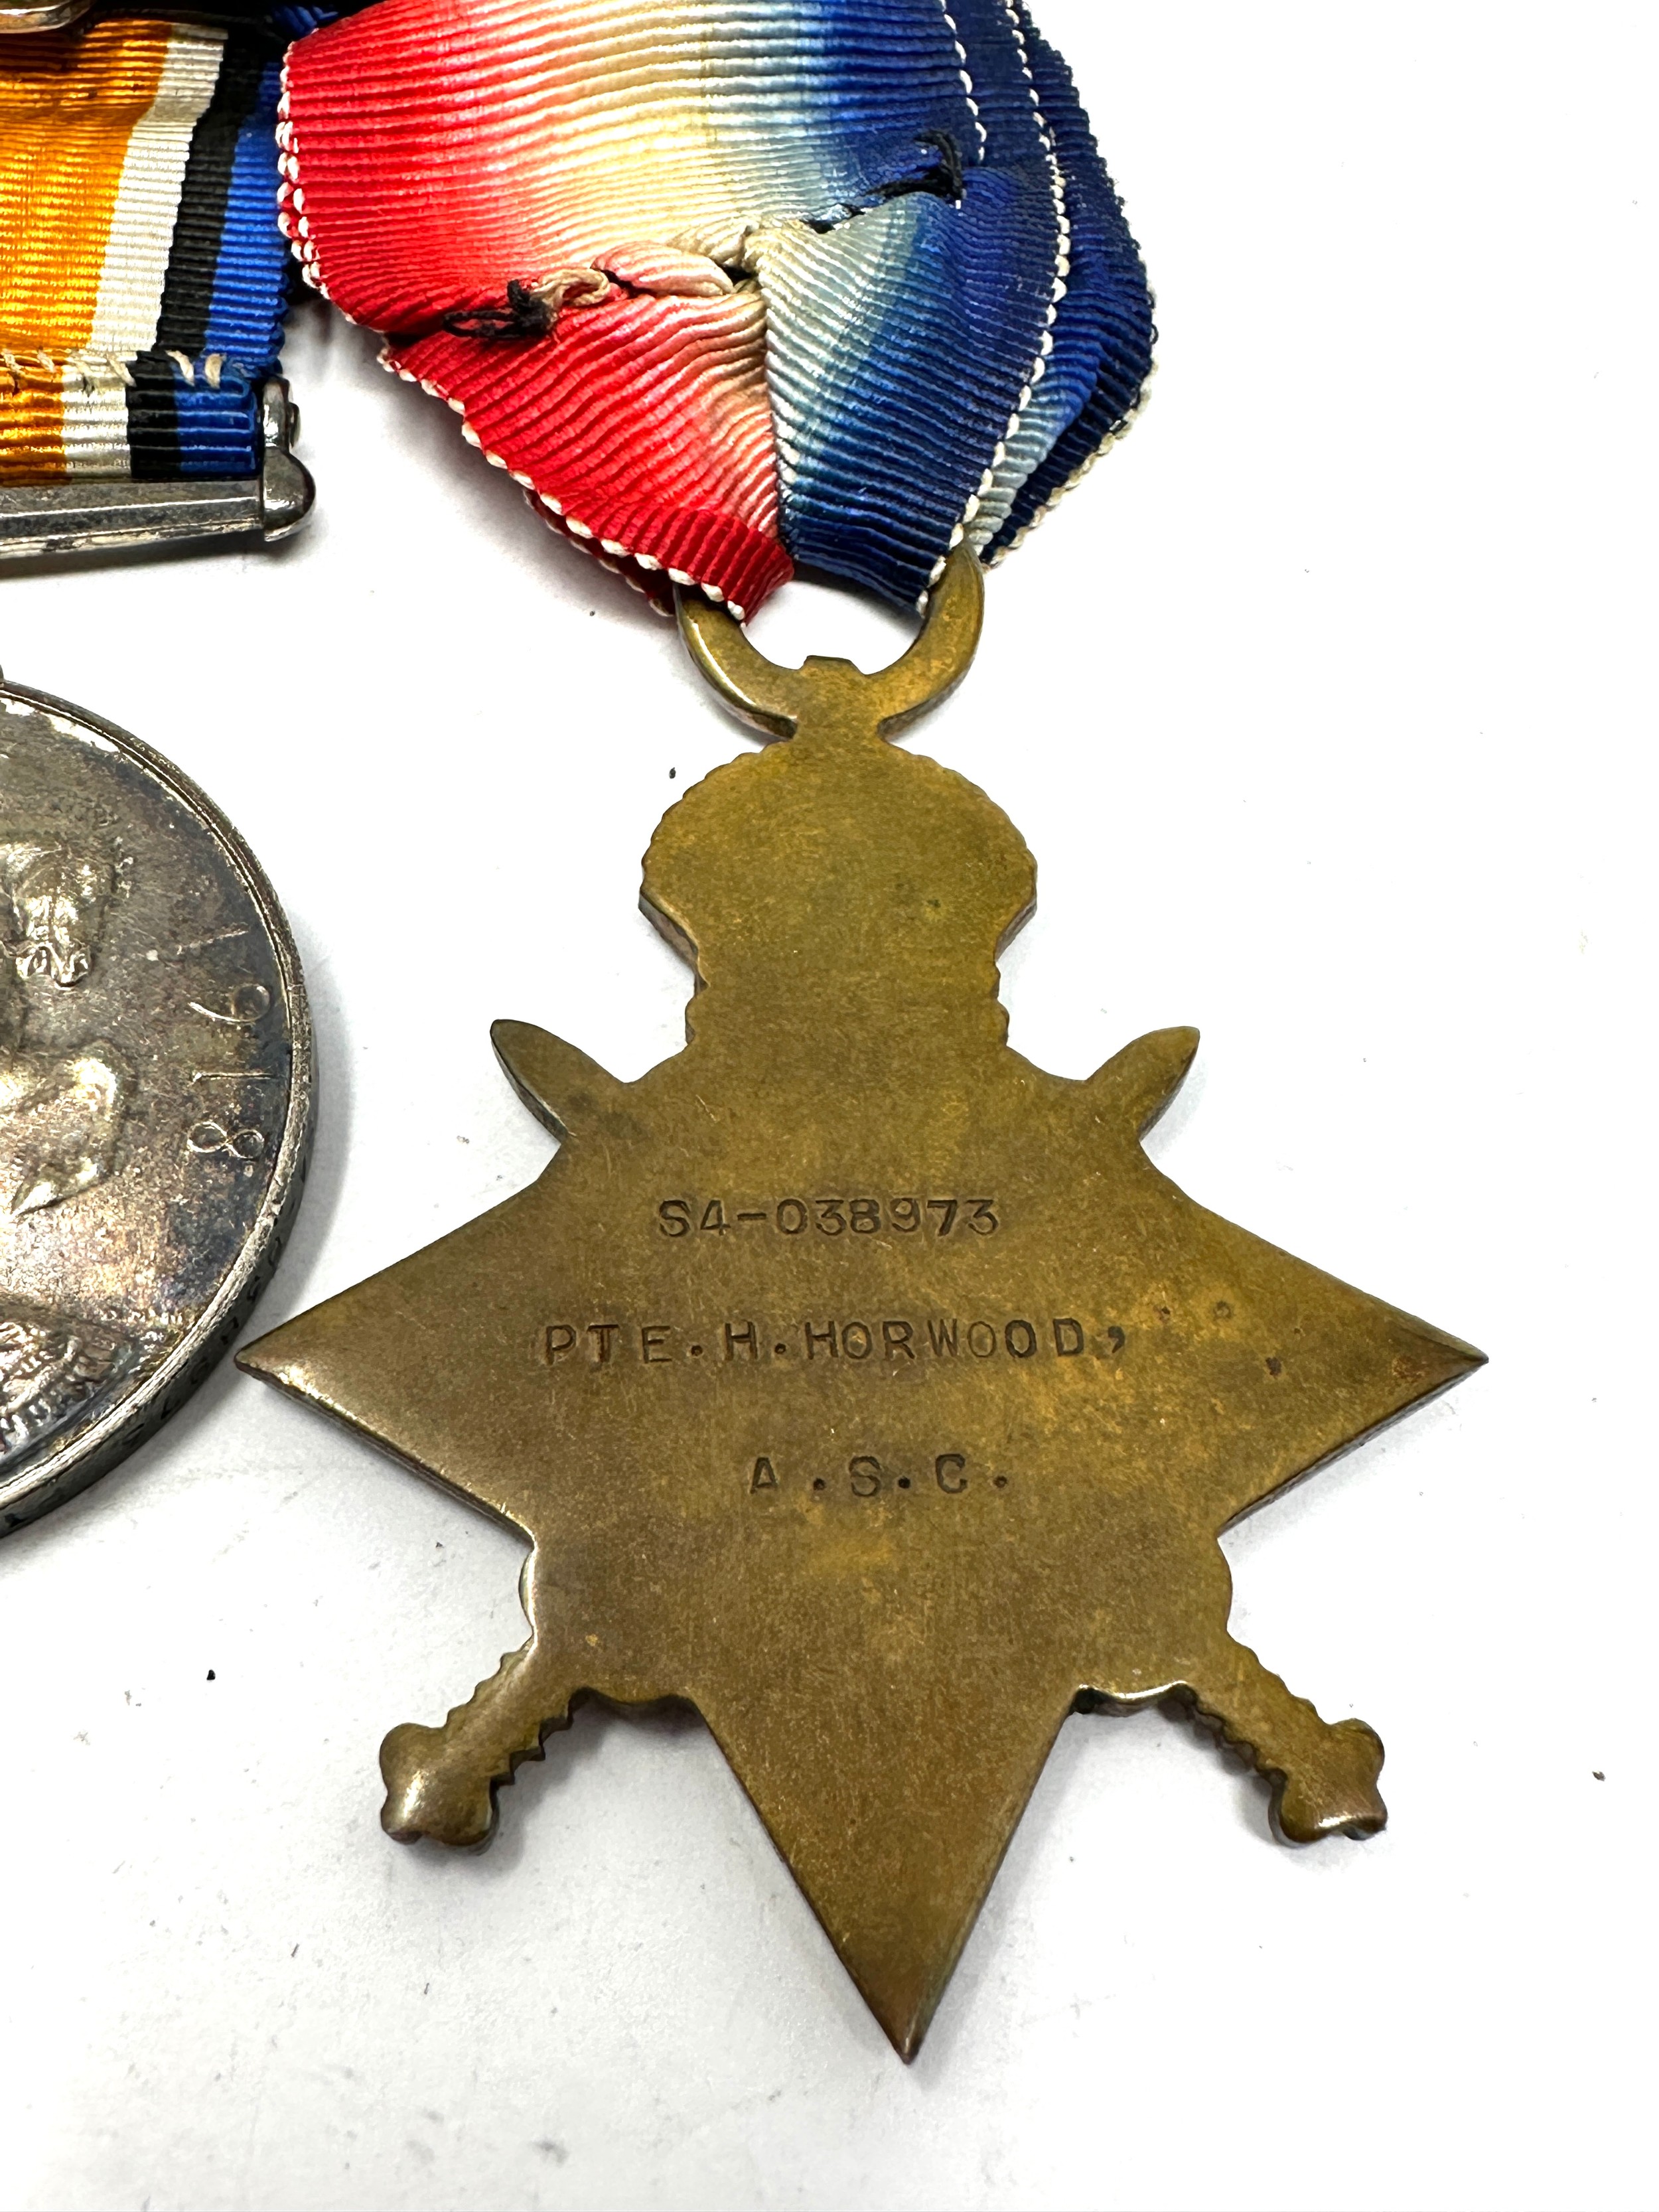 WW1 1914-15 Star Trio, Mounted, Named S4-038973 Pte H. Horwood A.S.C - Image 3 of 3